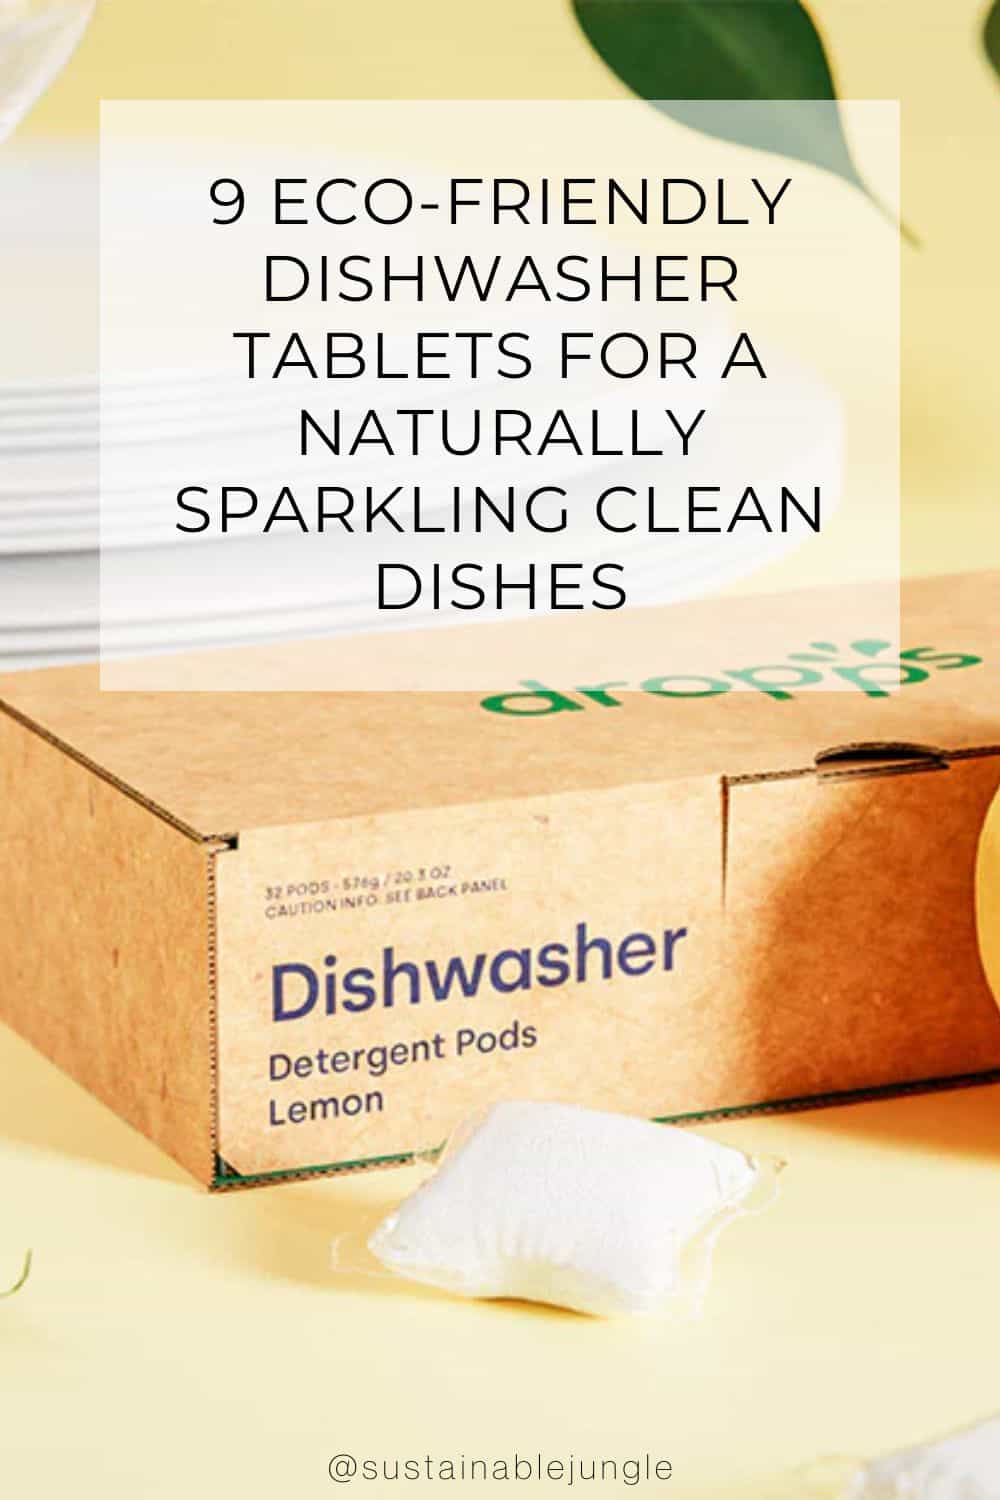 9 Eco-Friendly Dishwasher Tablets For A Naturally Sparkling Clean Dishes Image by Dropps #ecofriendlydishwashertablets #ecodishwashertablets #bestecofriendlydishwashertablets #ecofriendlyfidhwasherdetergenttablets #bestecodishwashertablets #sustainablejungle